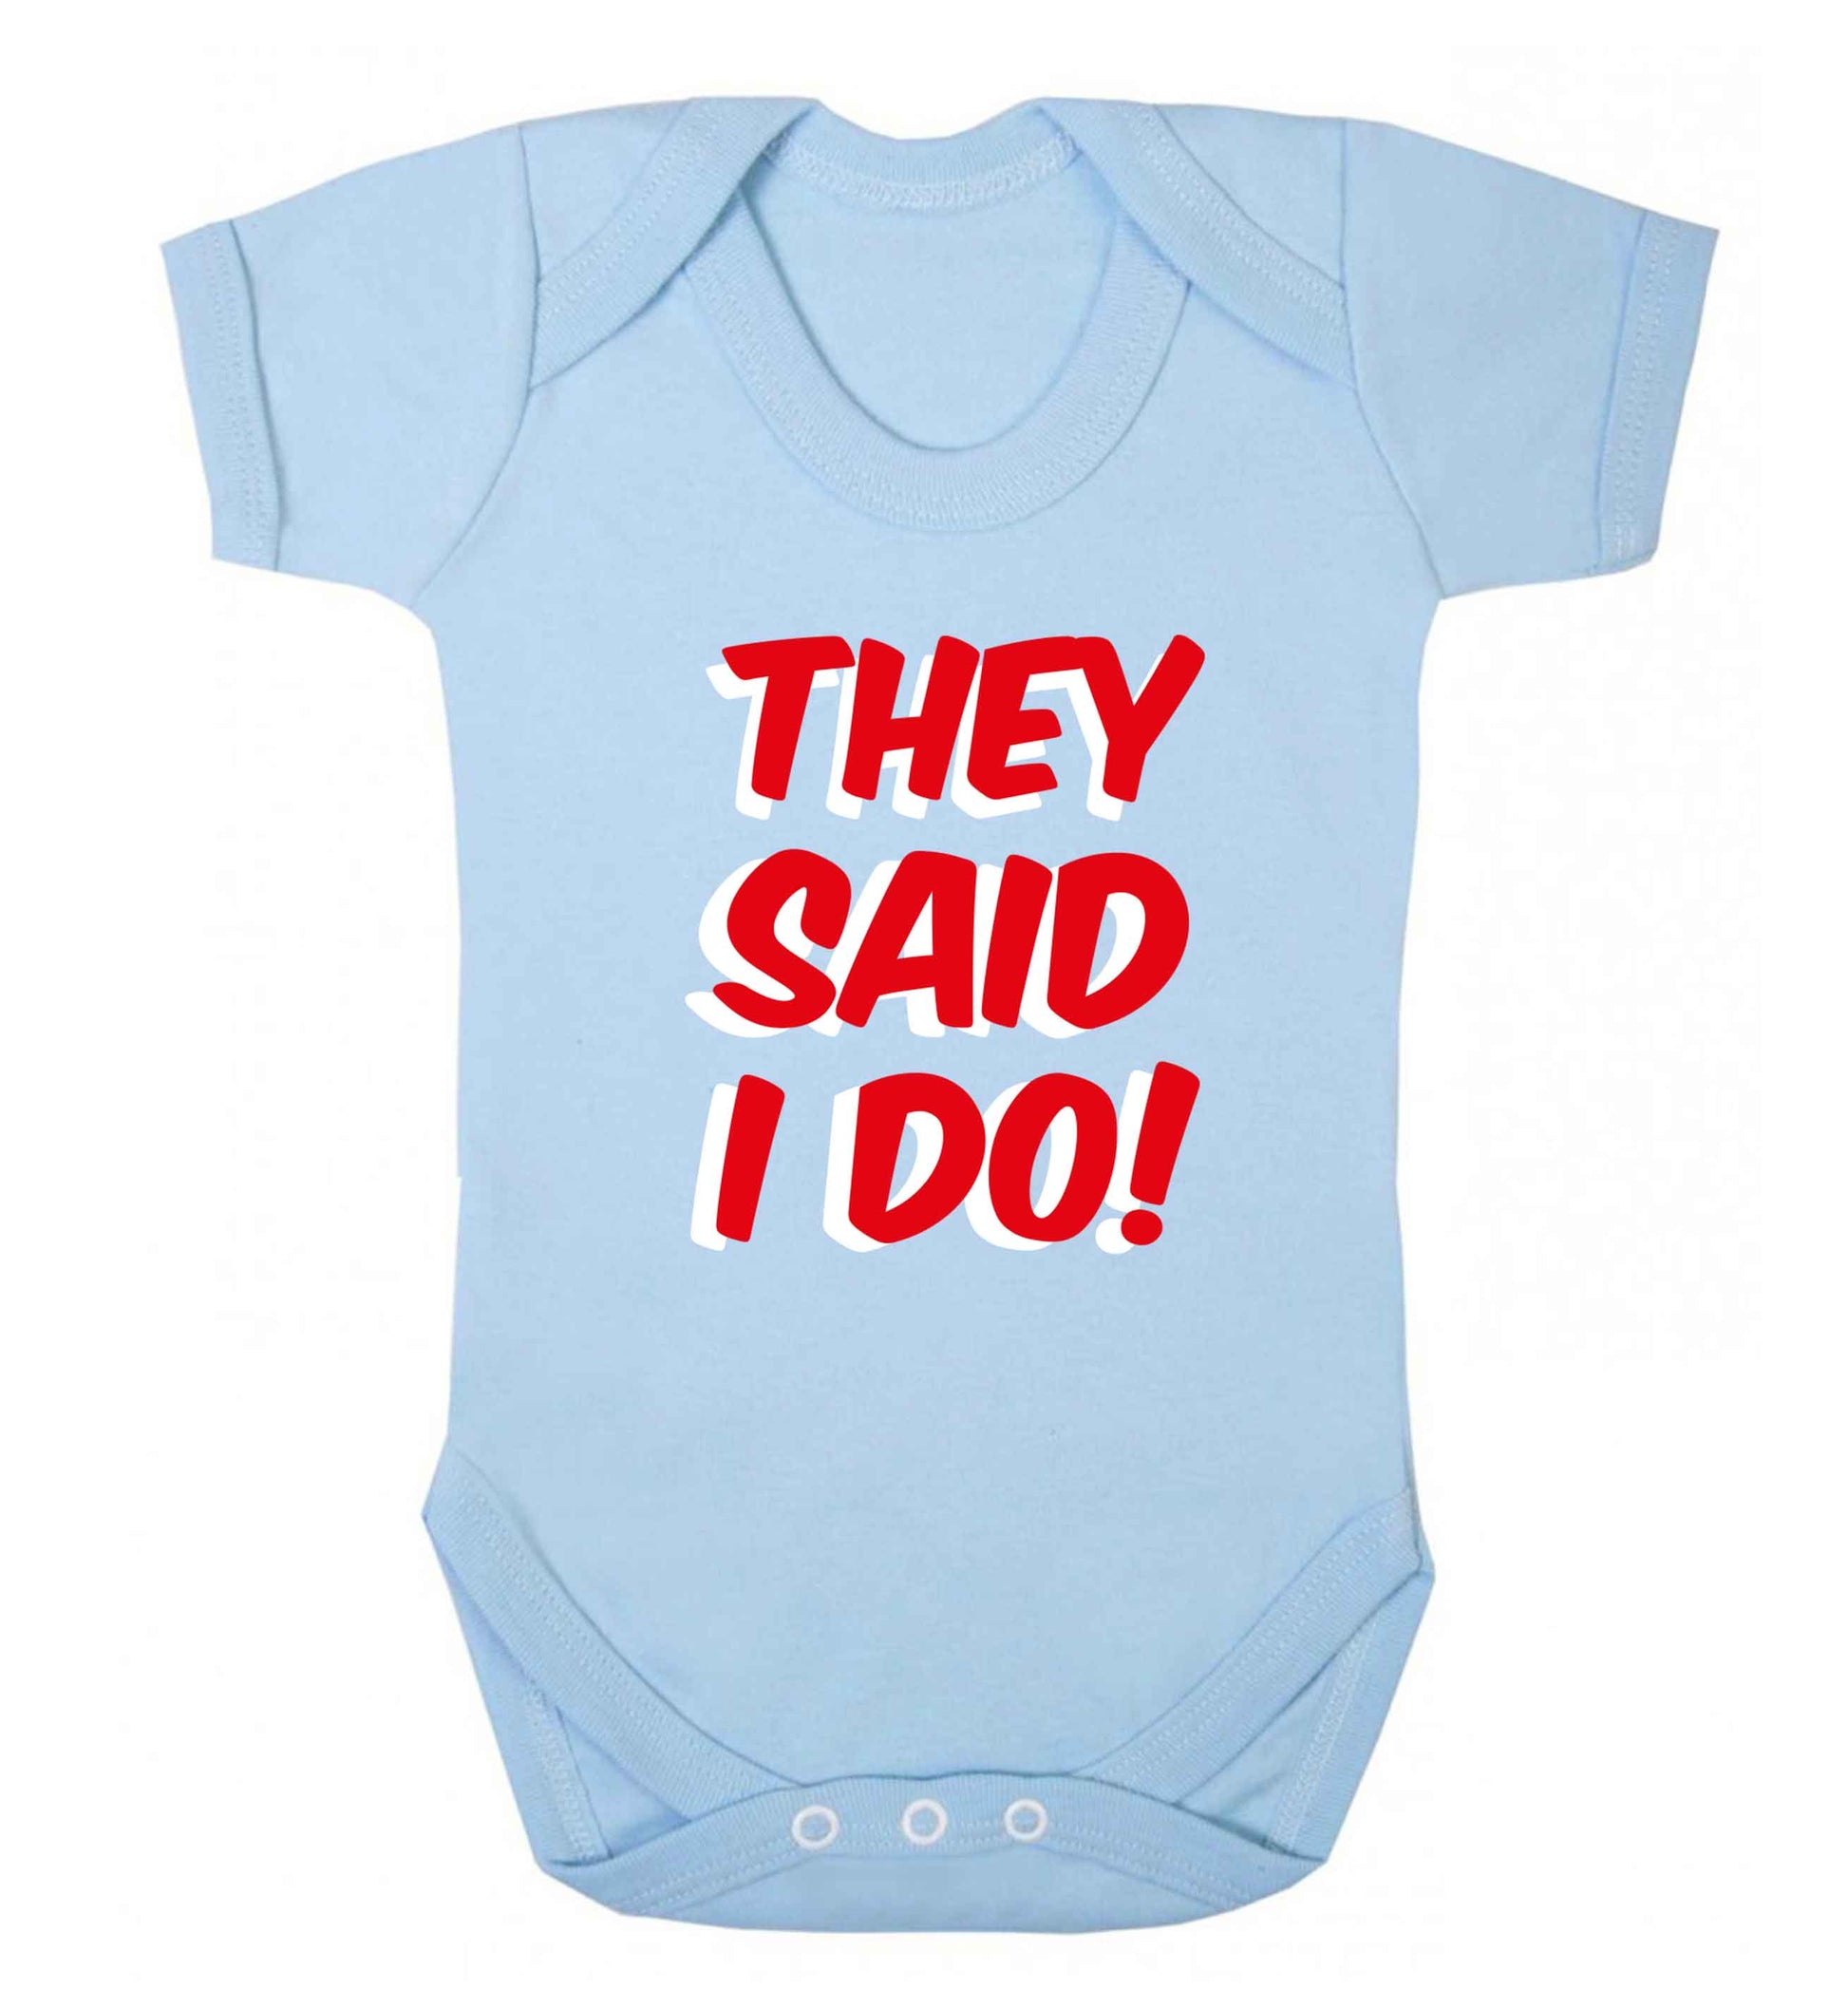 They said I do baby vest pale blue 18-24 months